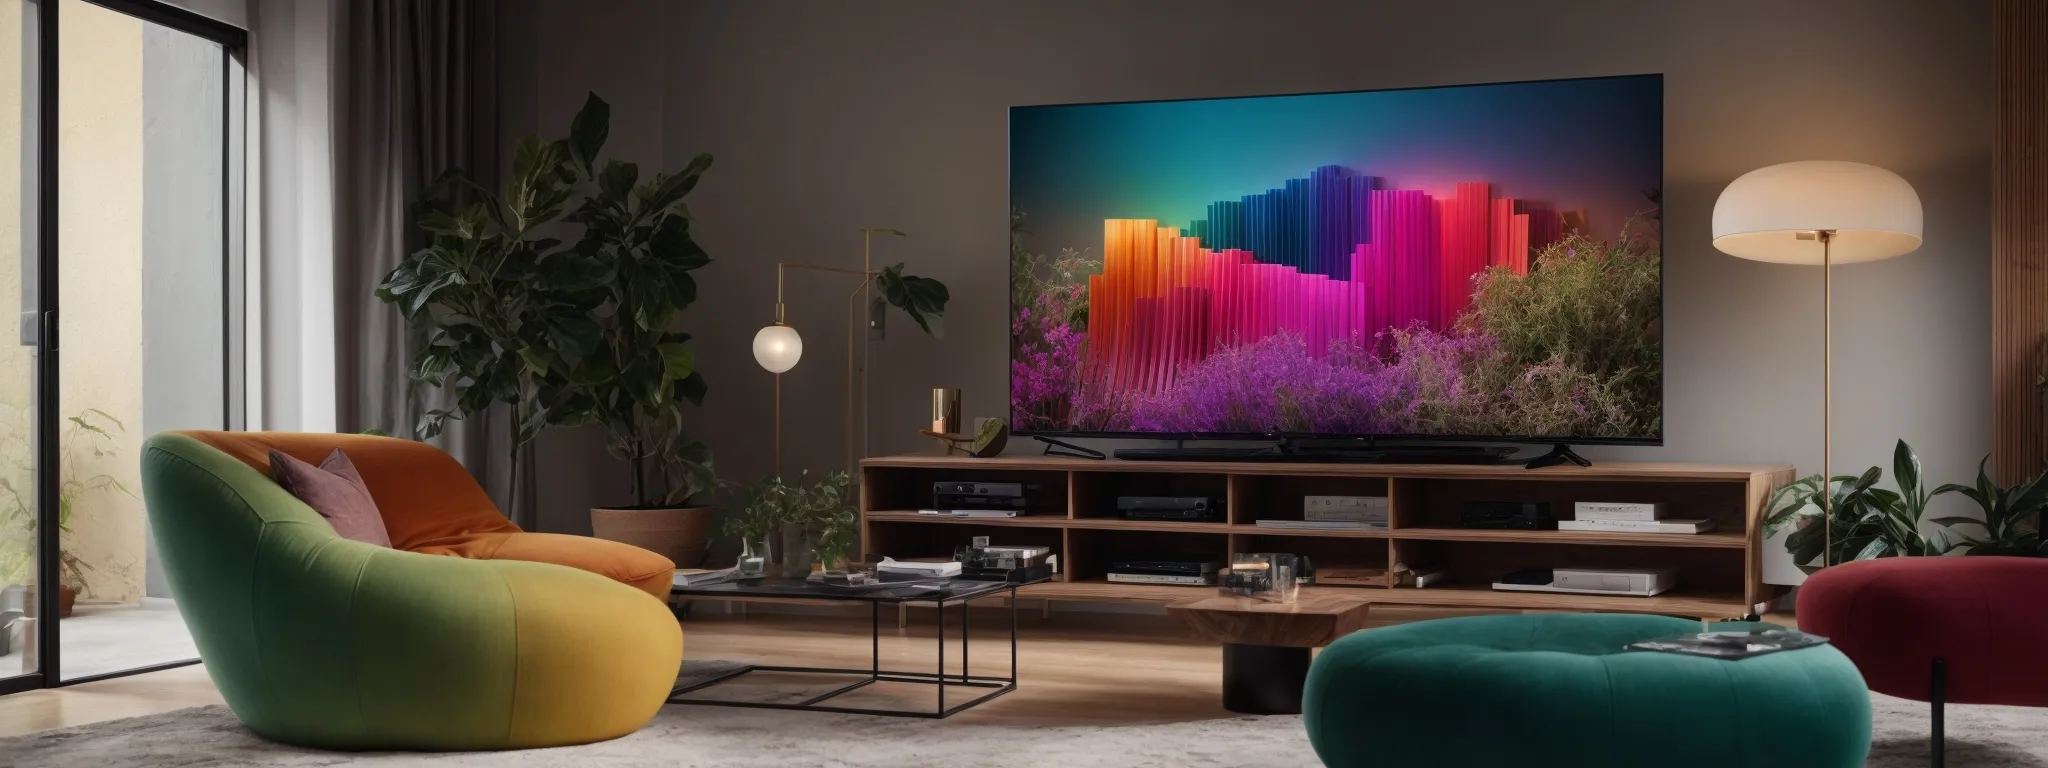 a modern living room with a sleek google tv displaying a colorful graph, symbolizing the evolution of seo in the streaming era.